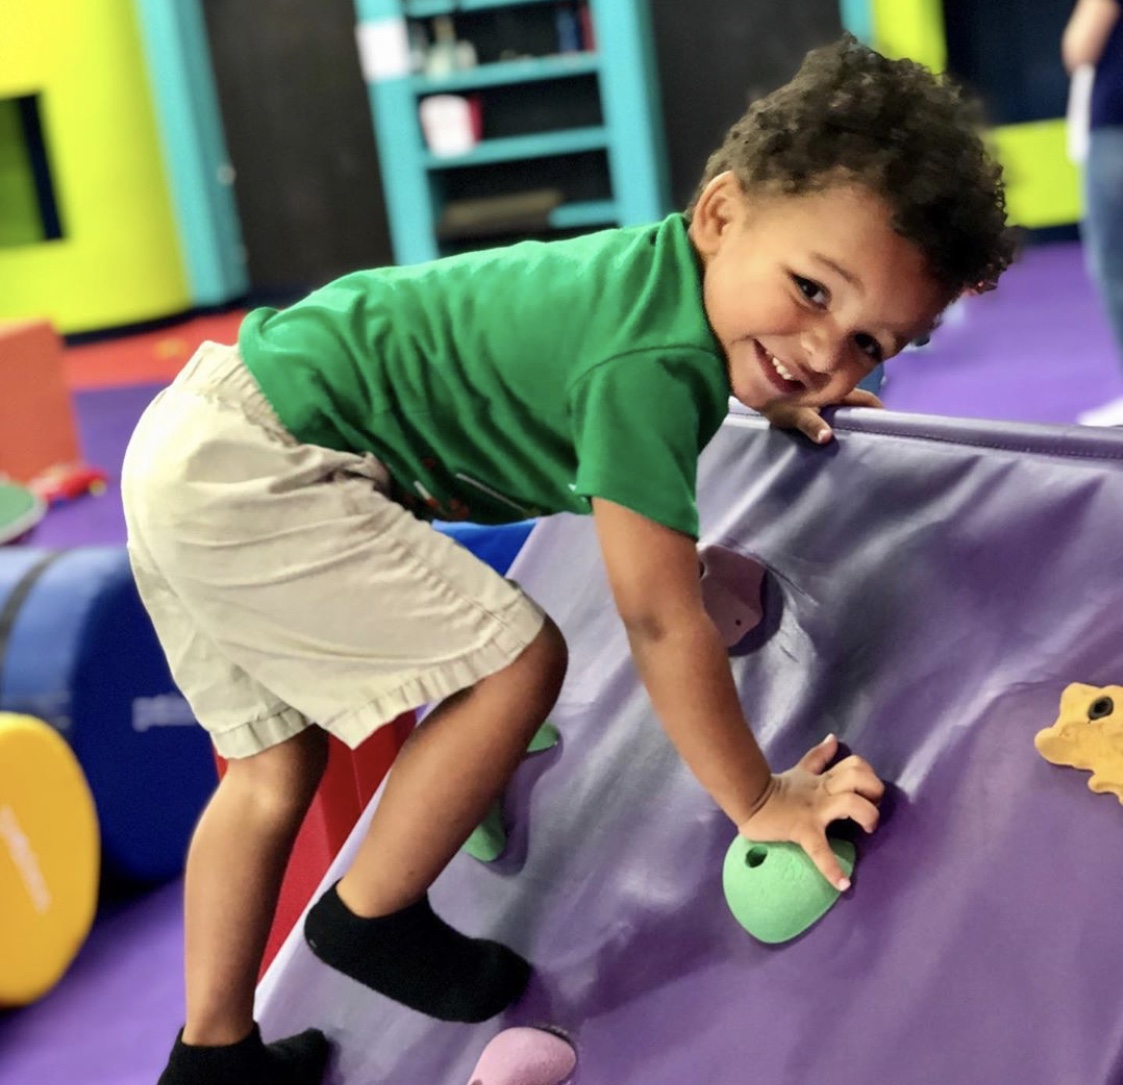 This sweet, smiling tot loves our toddler classes in Katy.